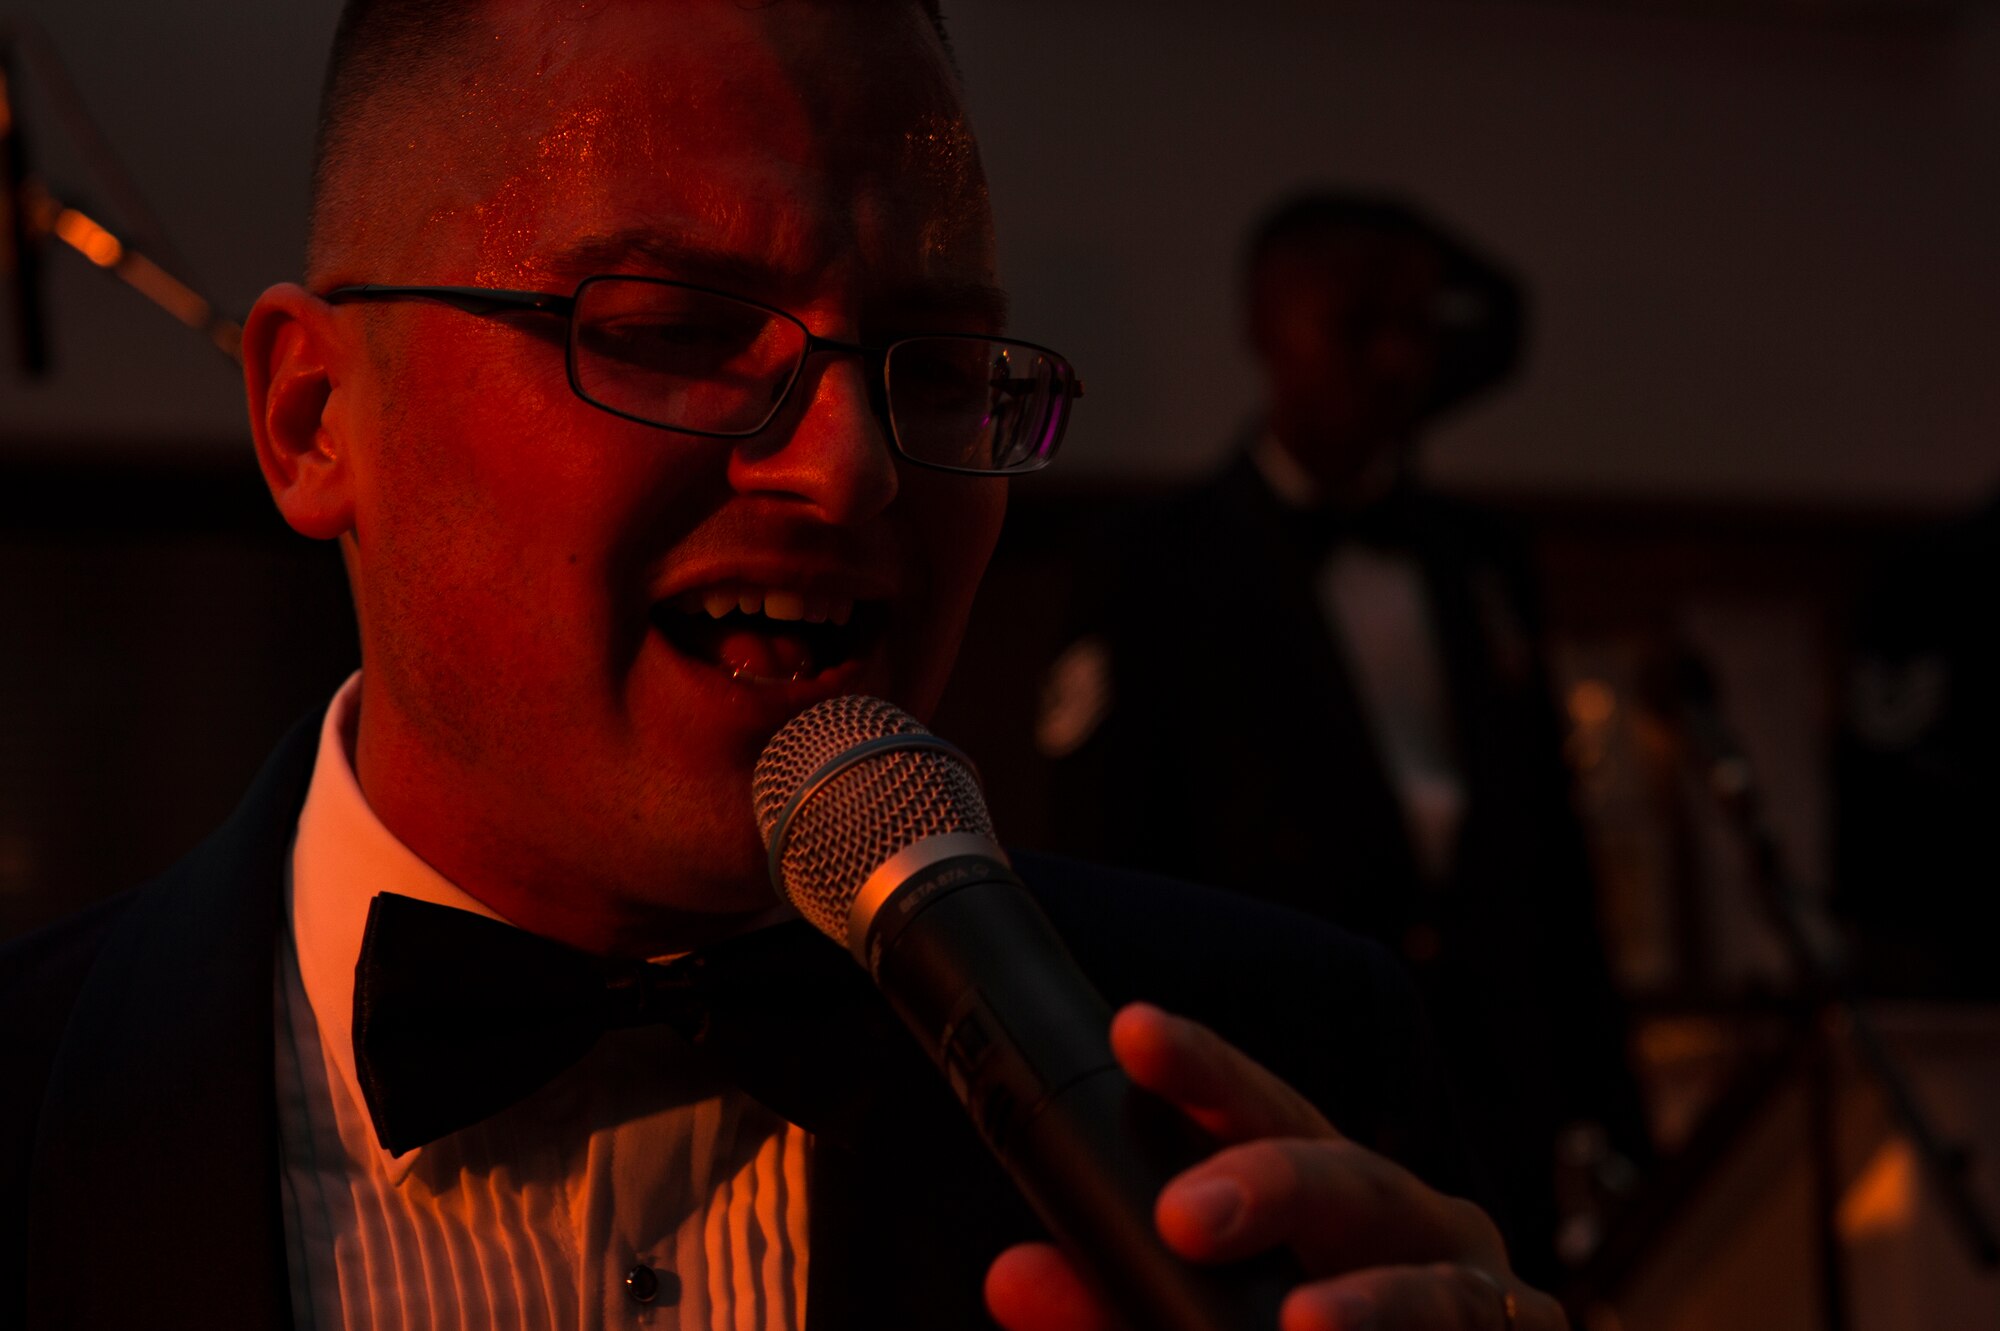 U.S. Air Force Staff Sgt. Nicholas Del Villano, U.S. Air Forces in Europe band member, sings during the 72nd Air Force birthday ball at Ramstein Air Base, Germany, Sept. 21, 2019. Del Villano performed with the USAFE Jazz and Rock bands, playing two sets of music, a jazz set during the dinner portion of the evening and a dance set after the formal portion of the evening. (U.S. Air Force photo by Staff Sgt. Jonathan Bass)